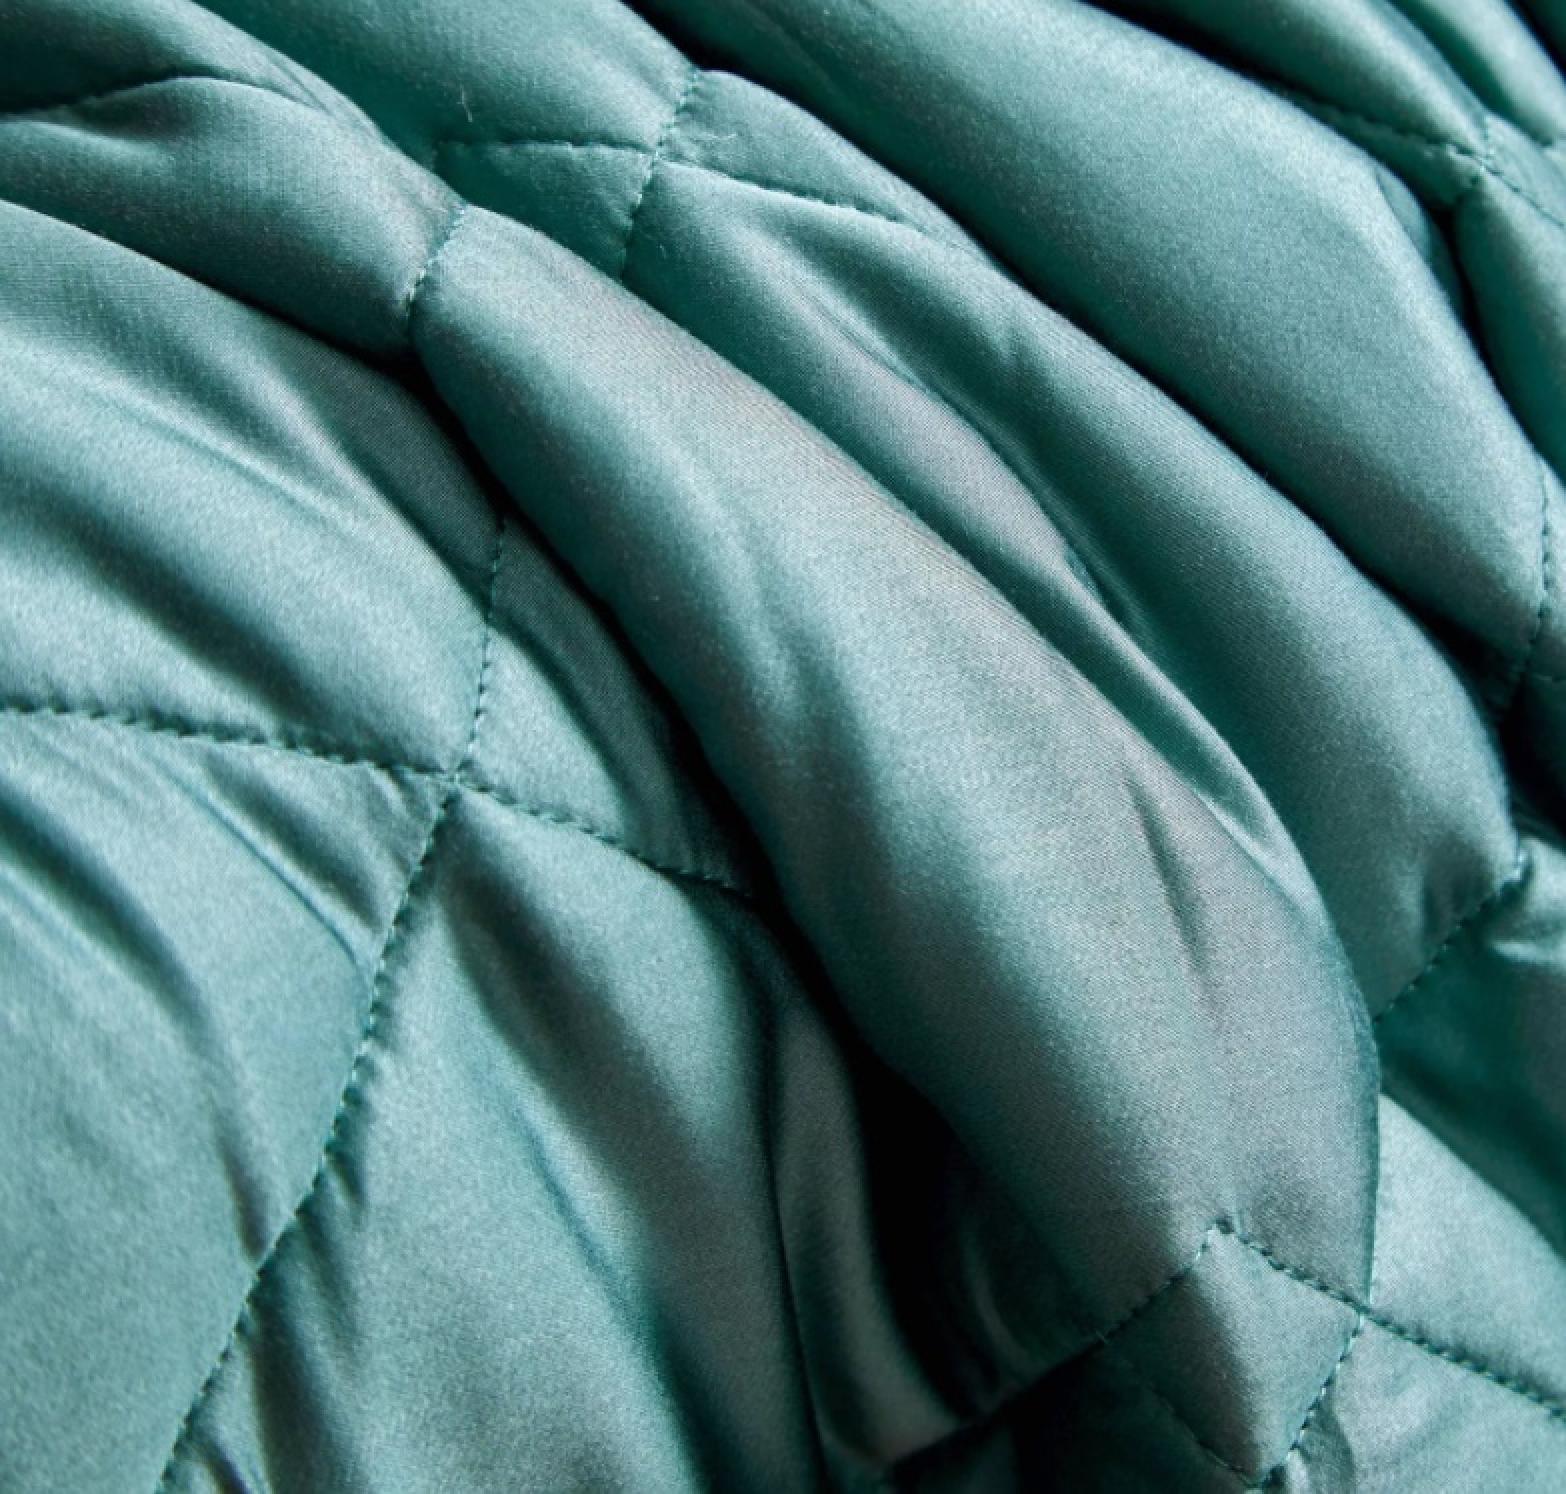 Sutton 15lbs Rayon from Bamboo Weighted Green Blanket Texture